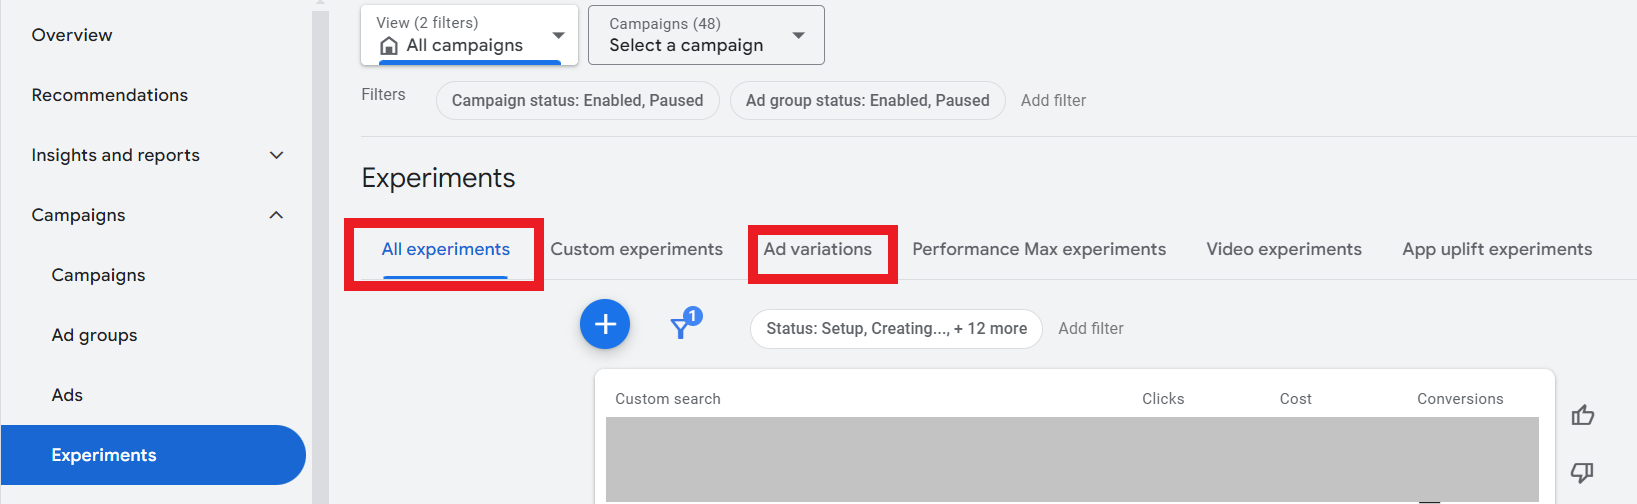 google ads experiments updated 137 - 15 Ways To Improve Conversion Rates In Google Ads